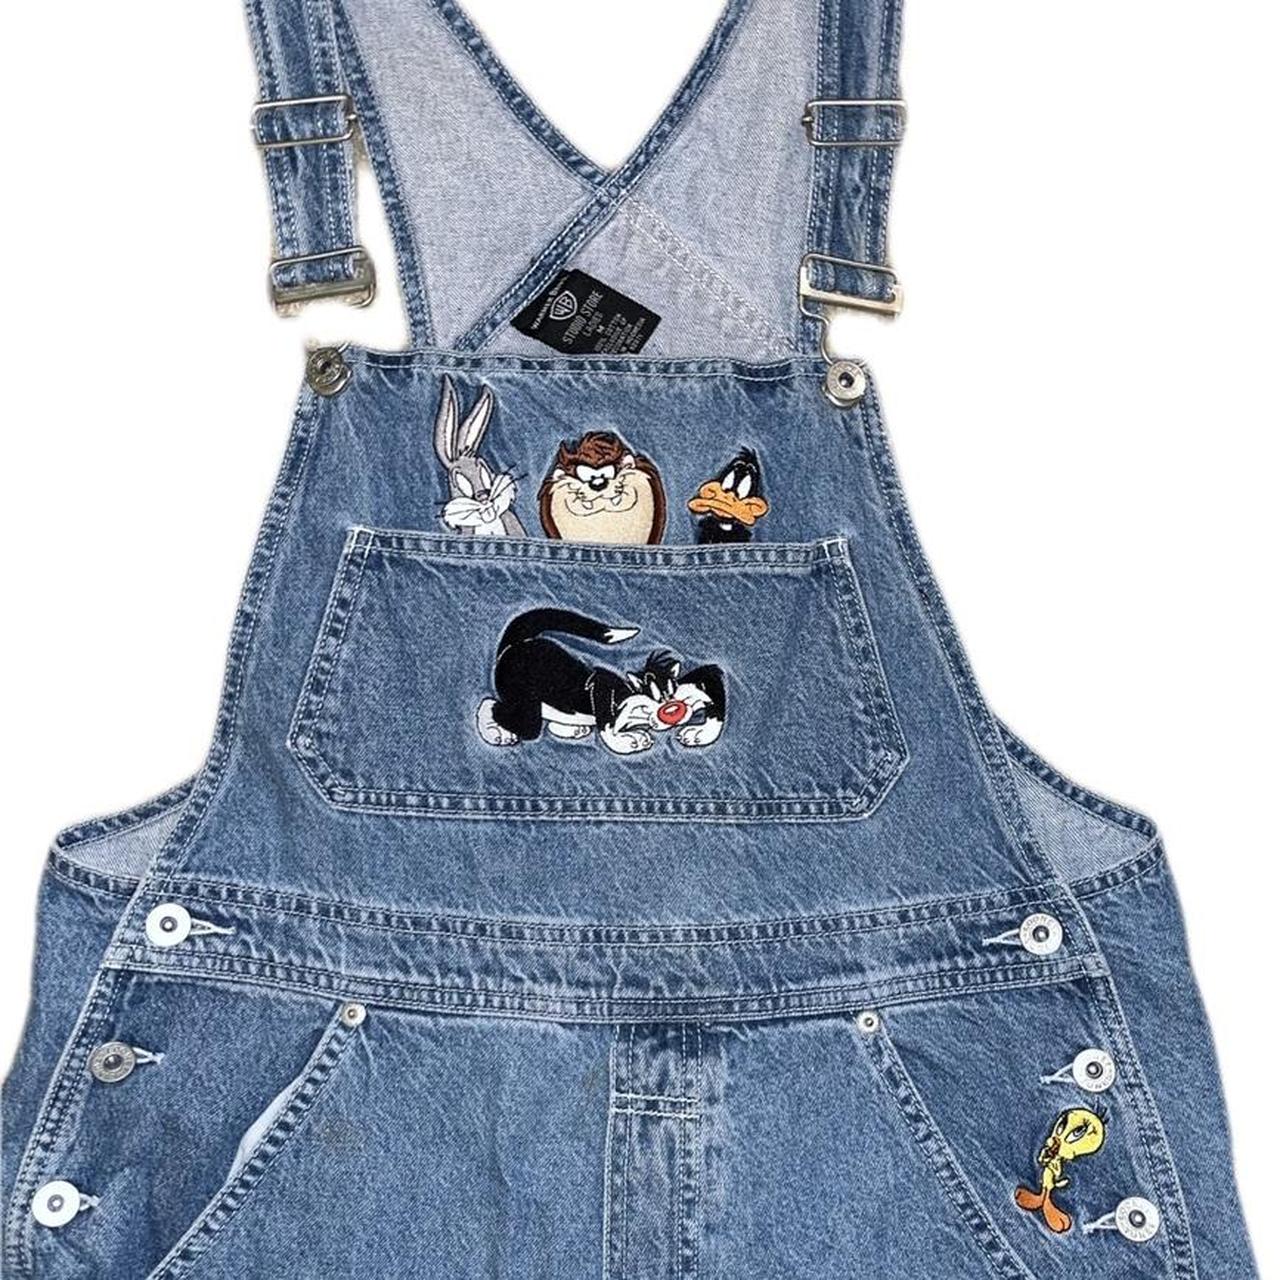 Warner Bros Dons Its Overalls for New Announcement